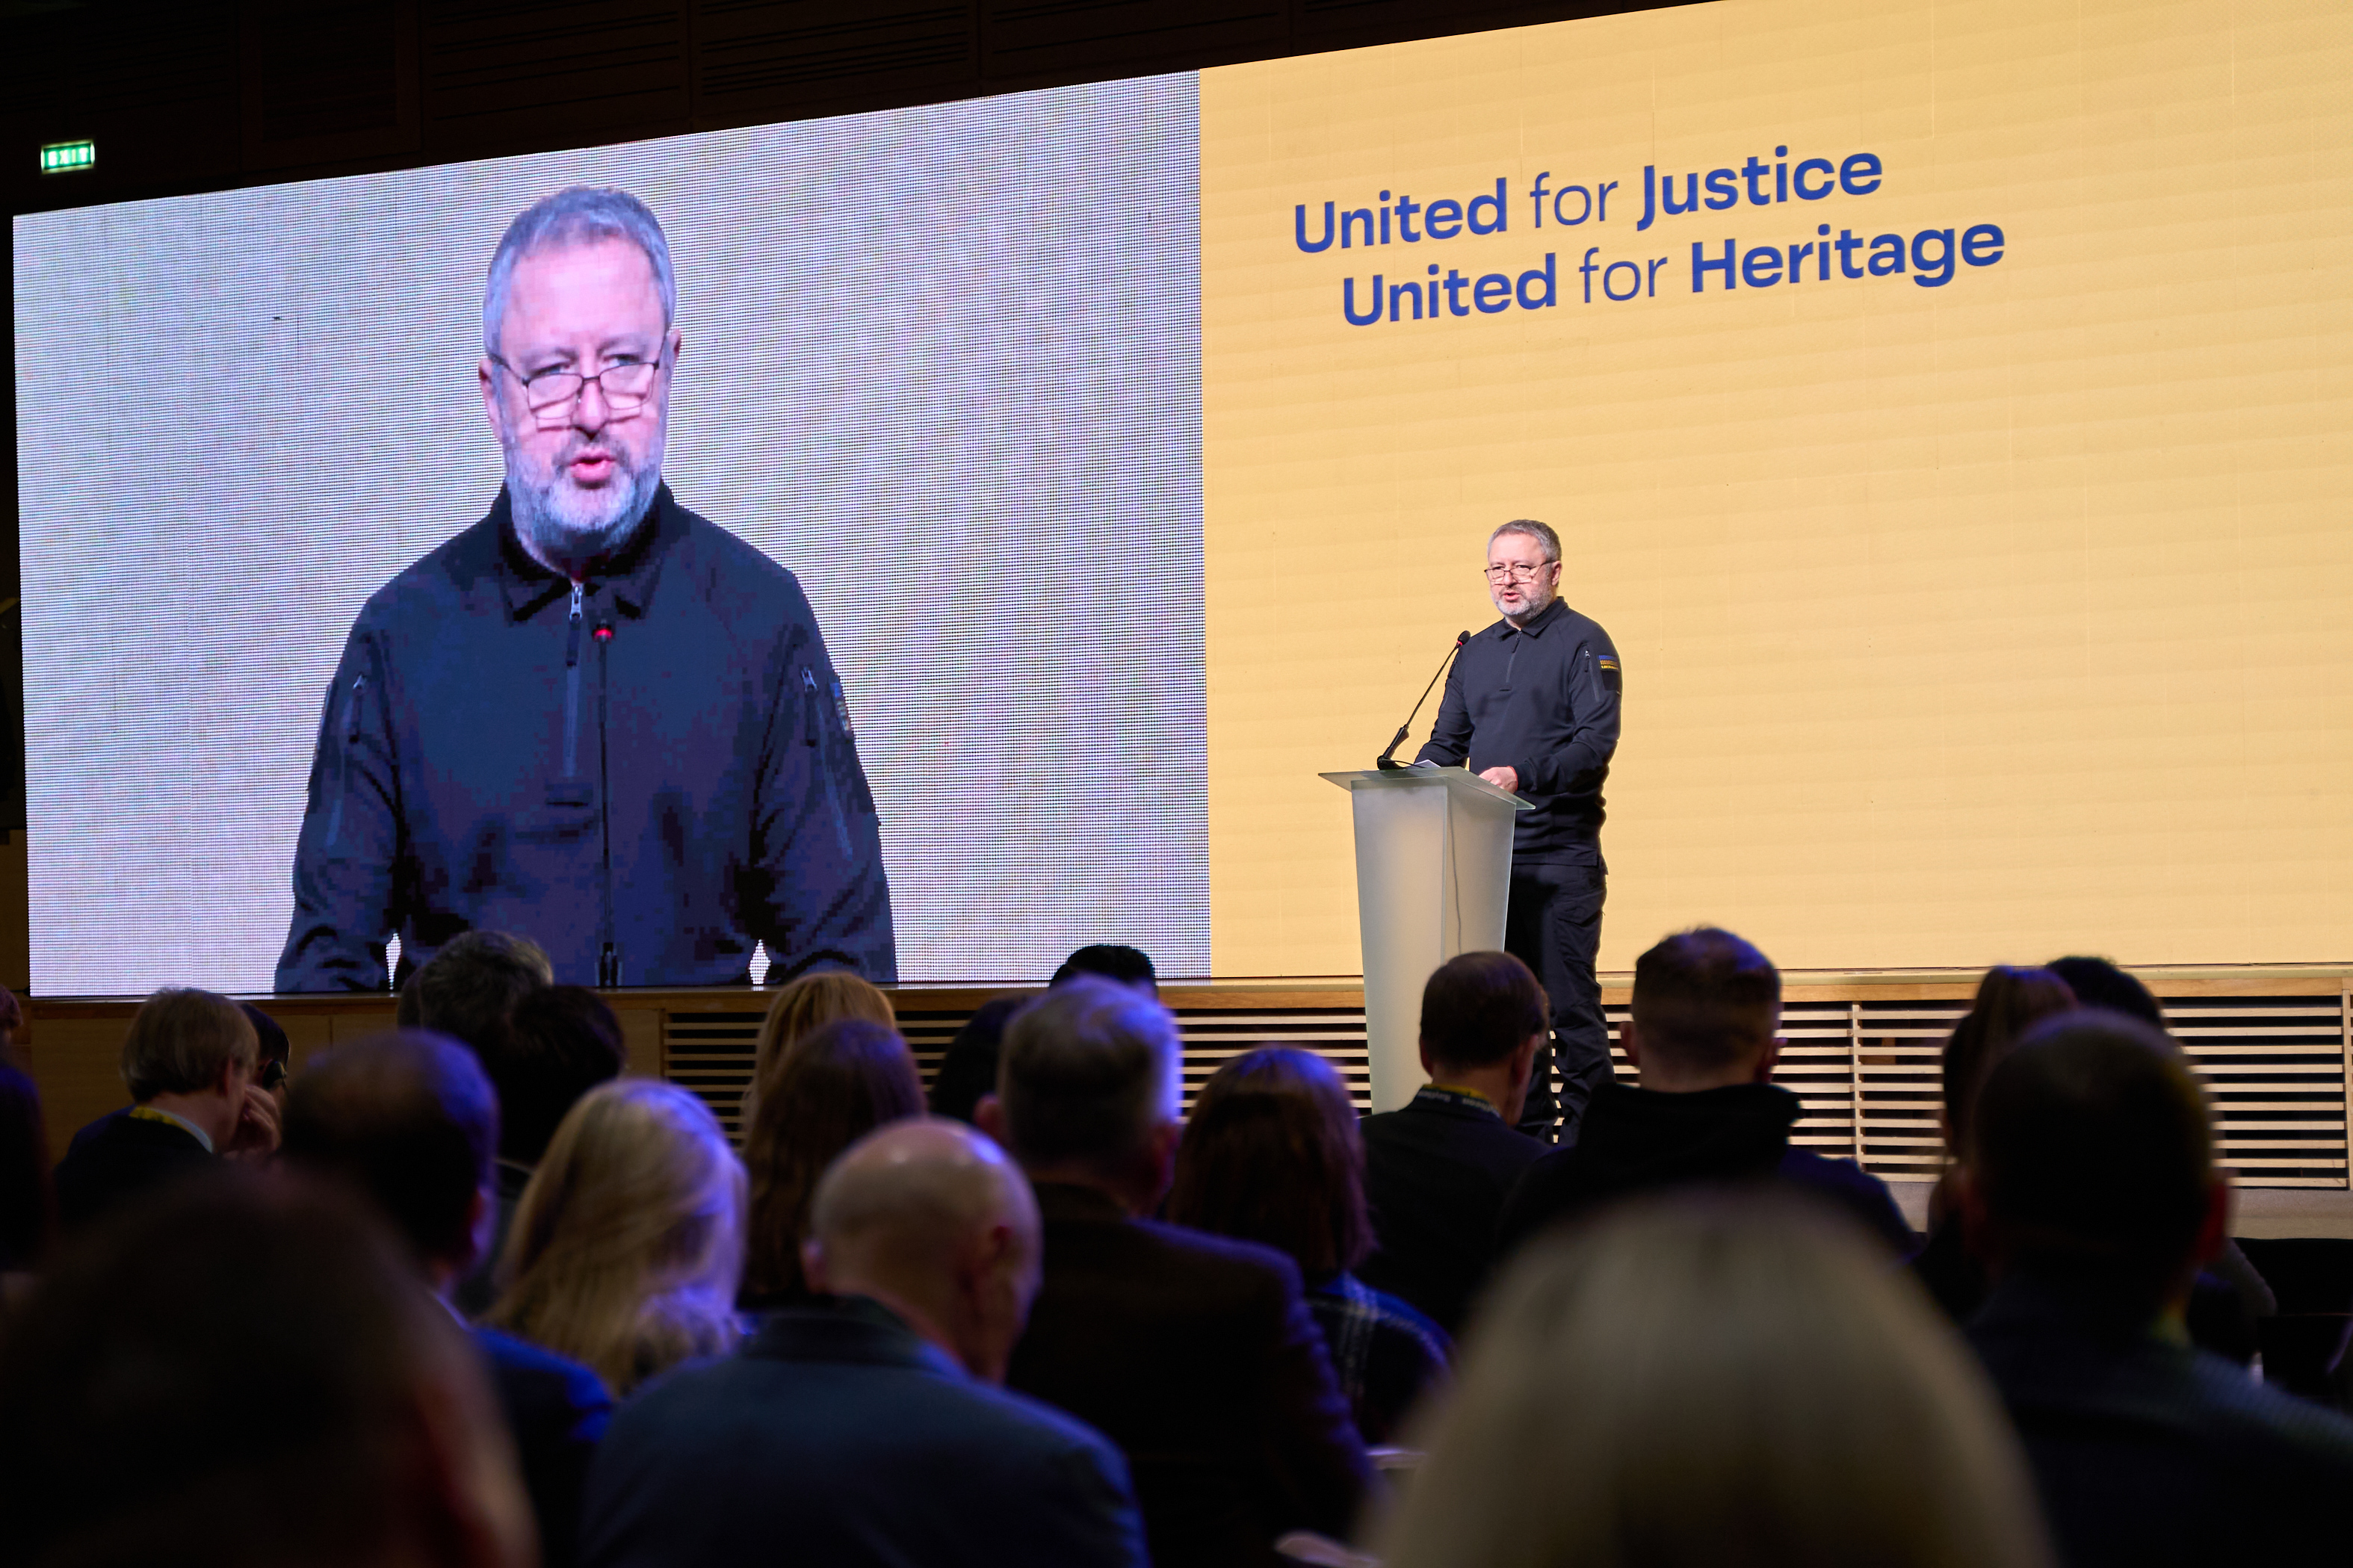 United for Justice. United for Heritage